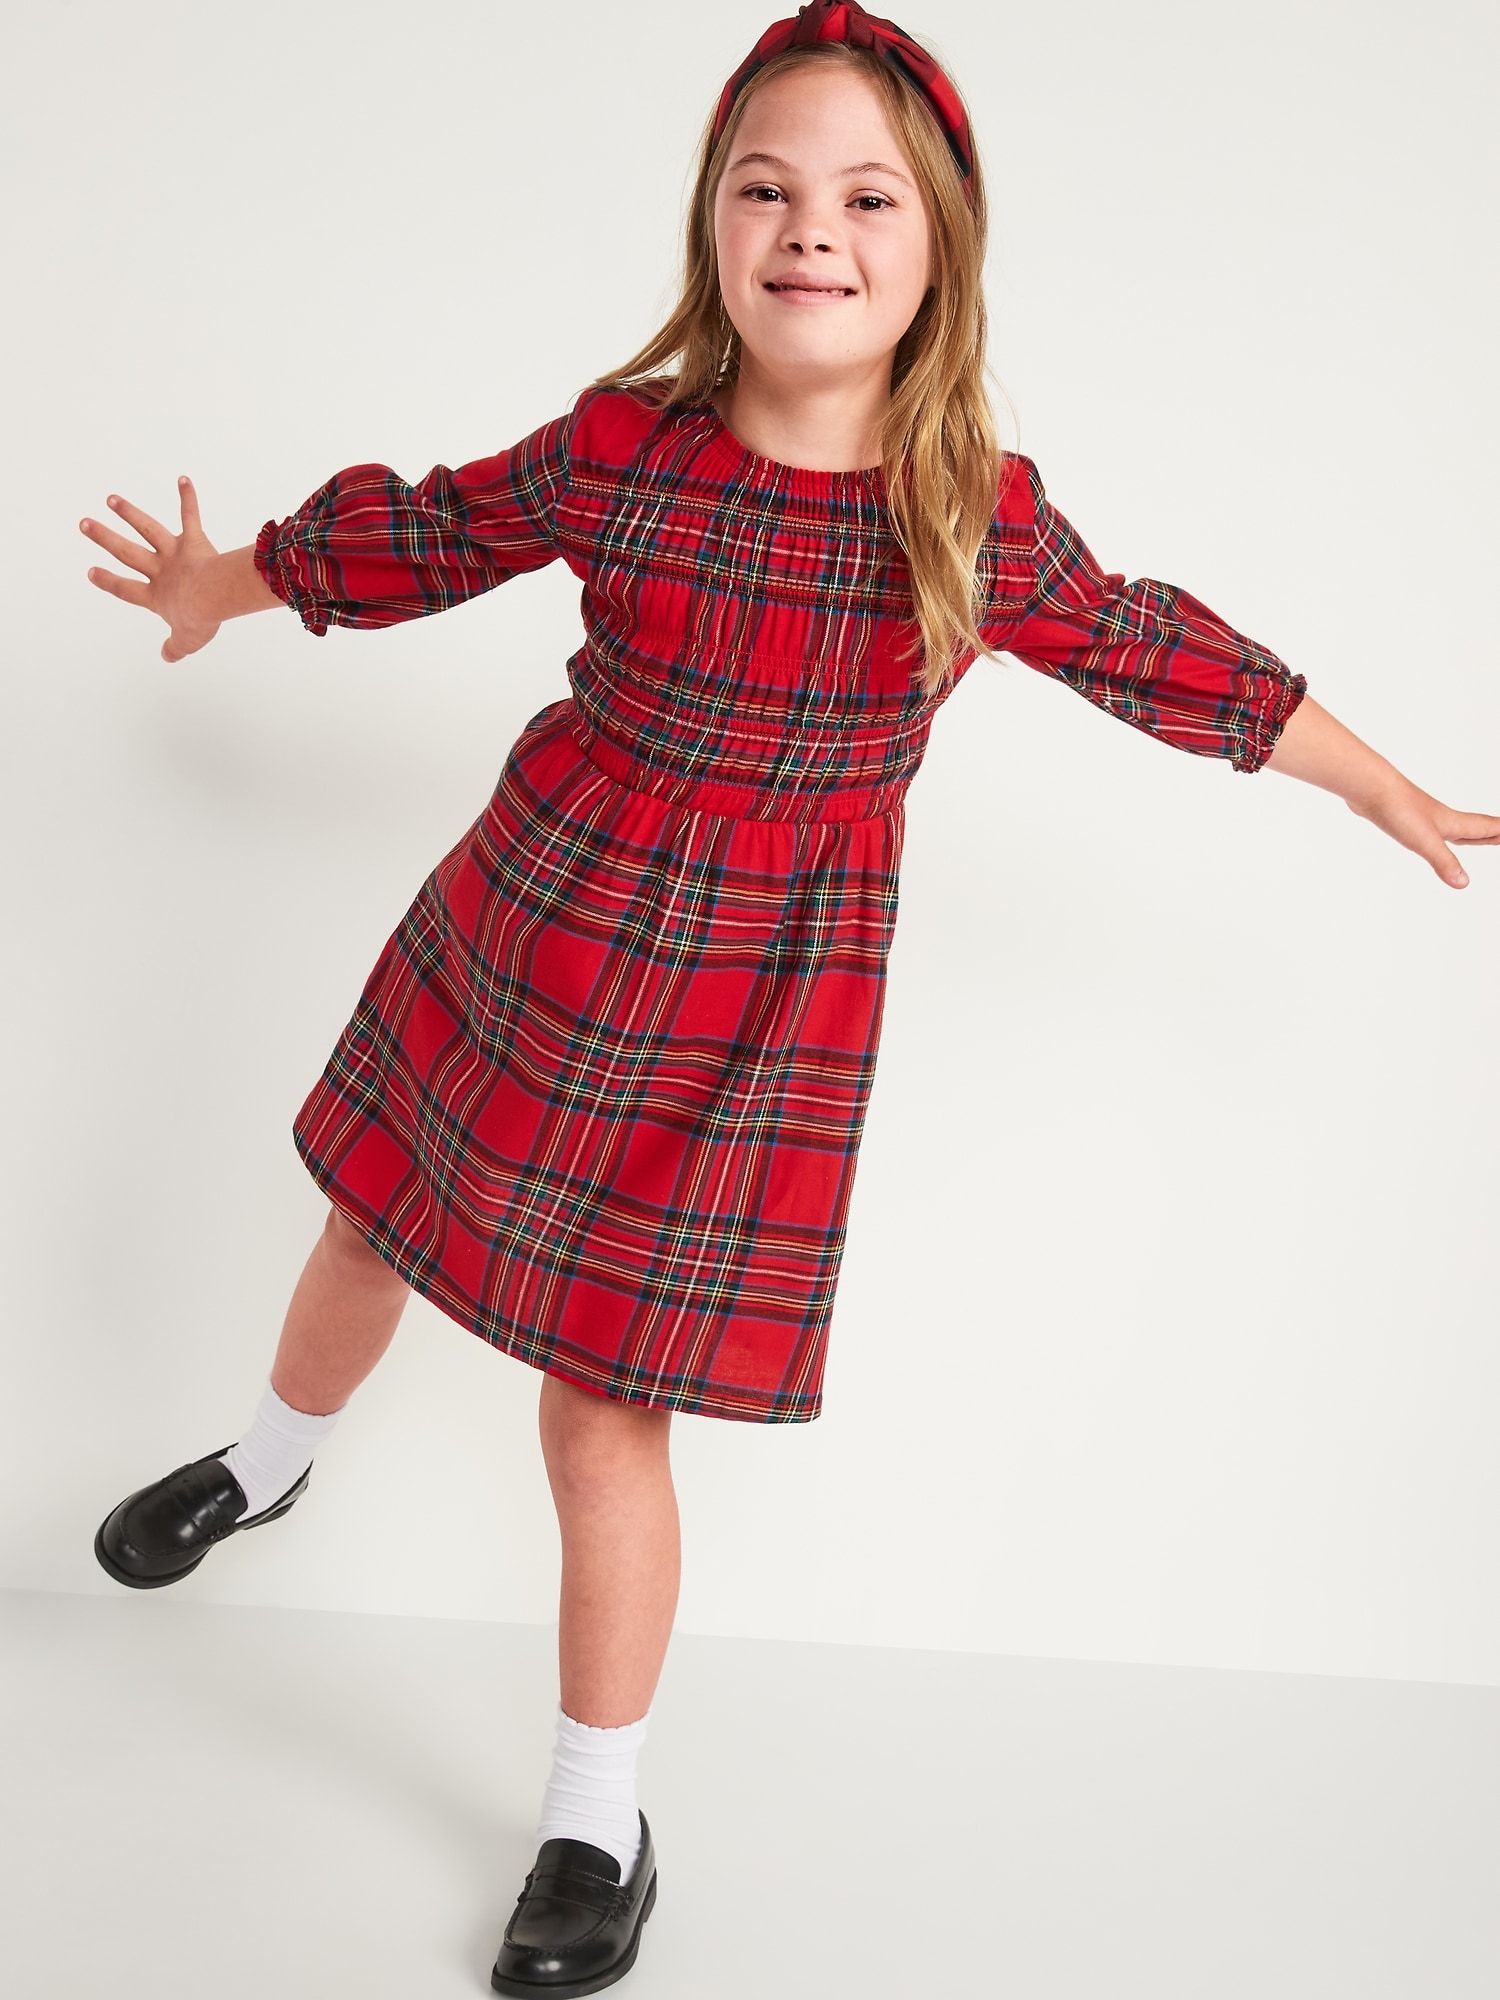 Plaid Flannel Smocked Long-Sleeve Dress for Girls